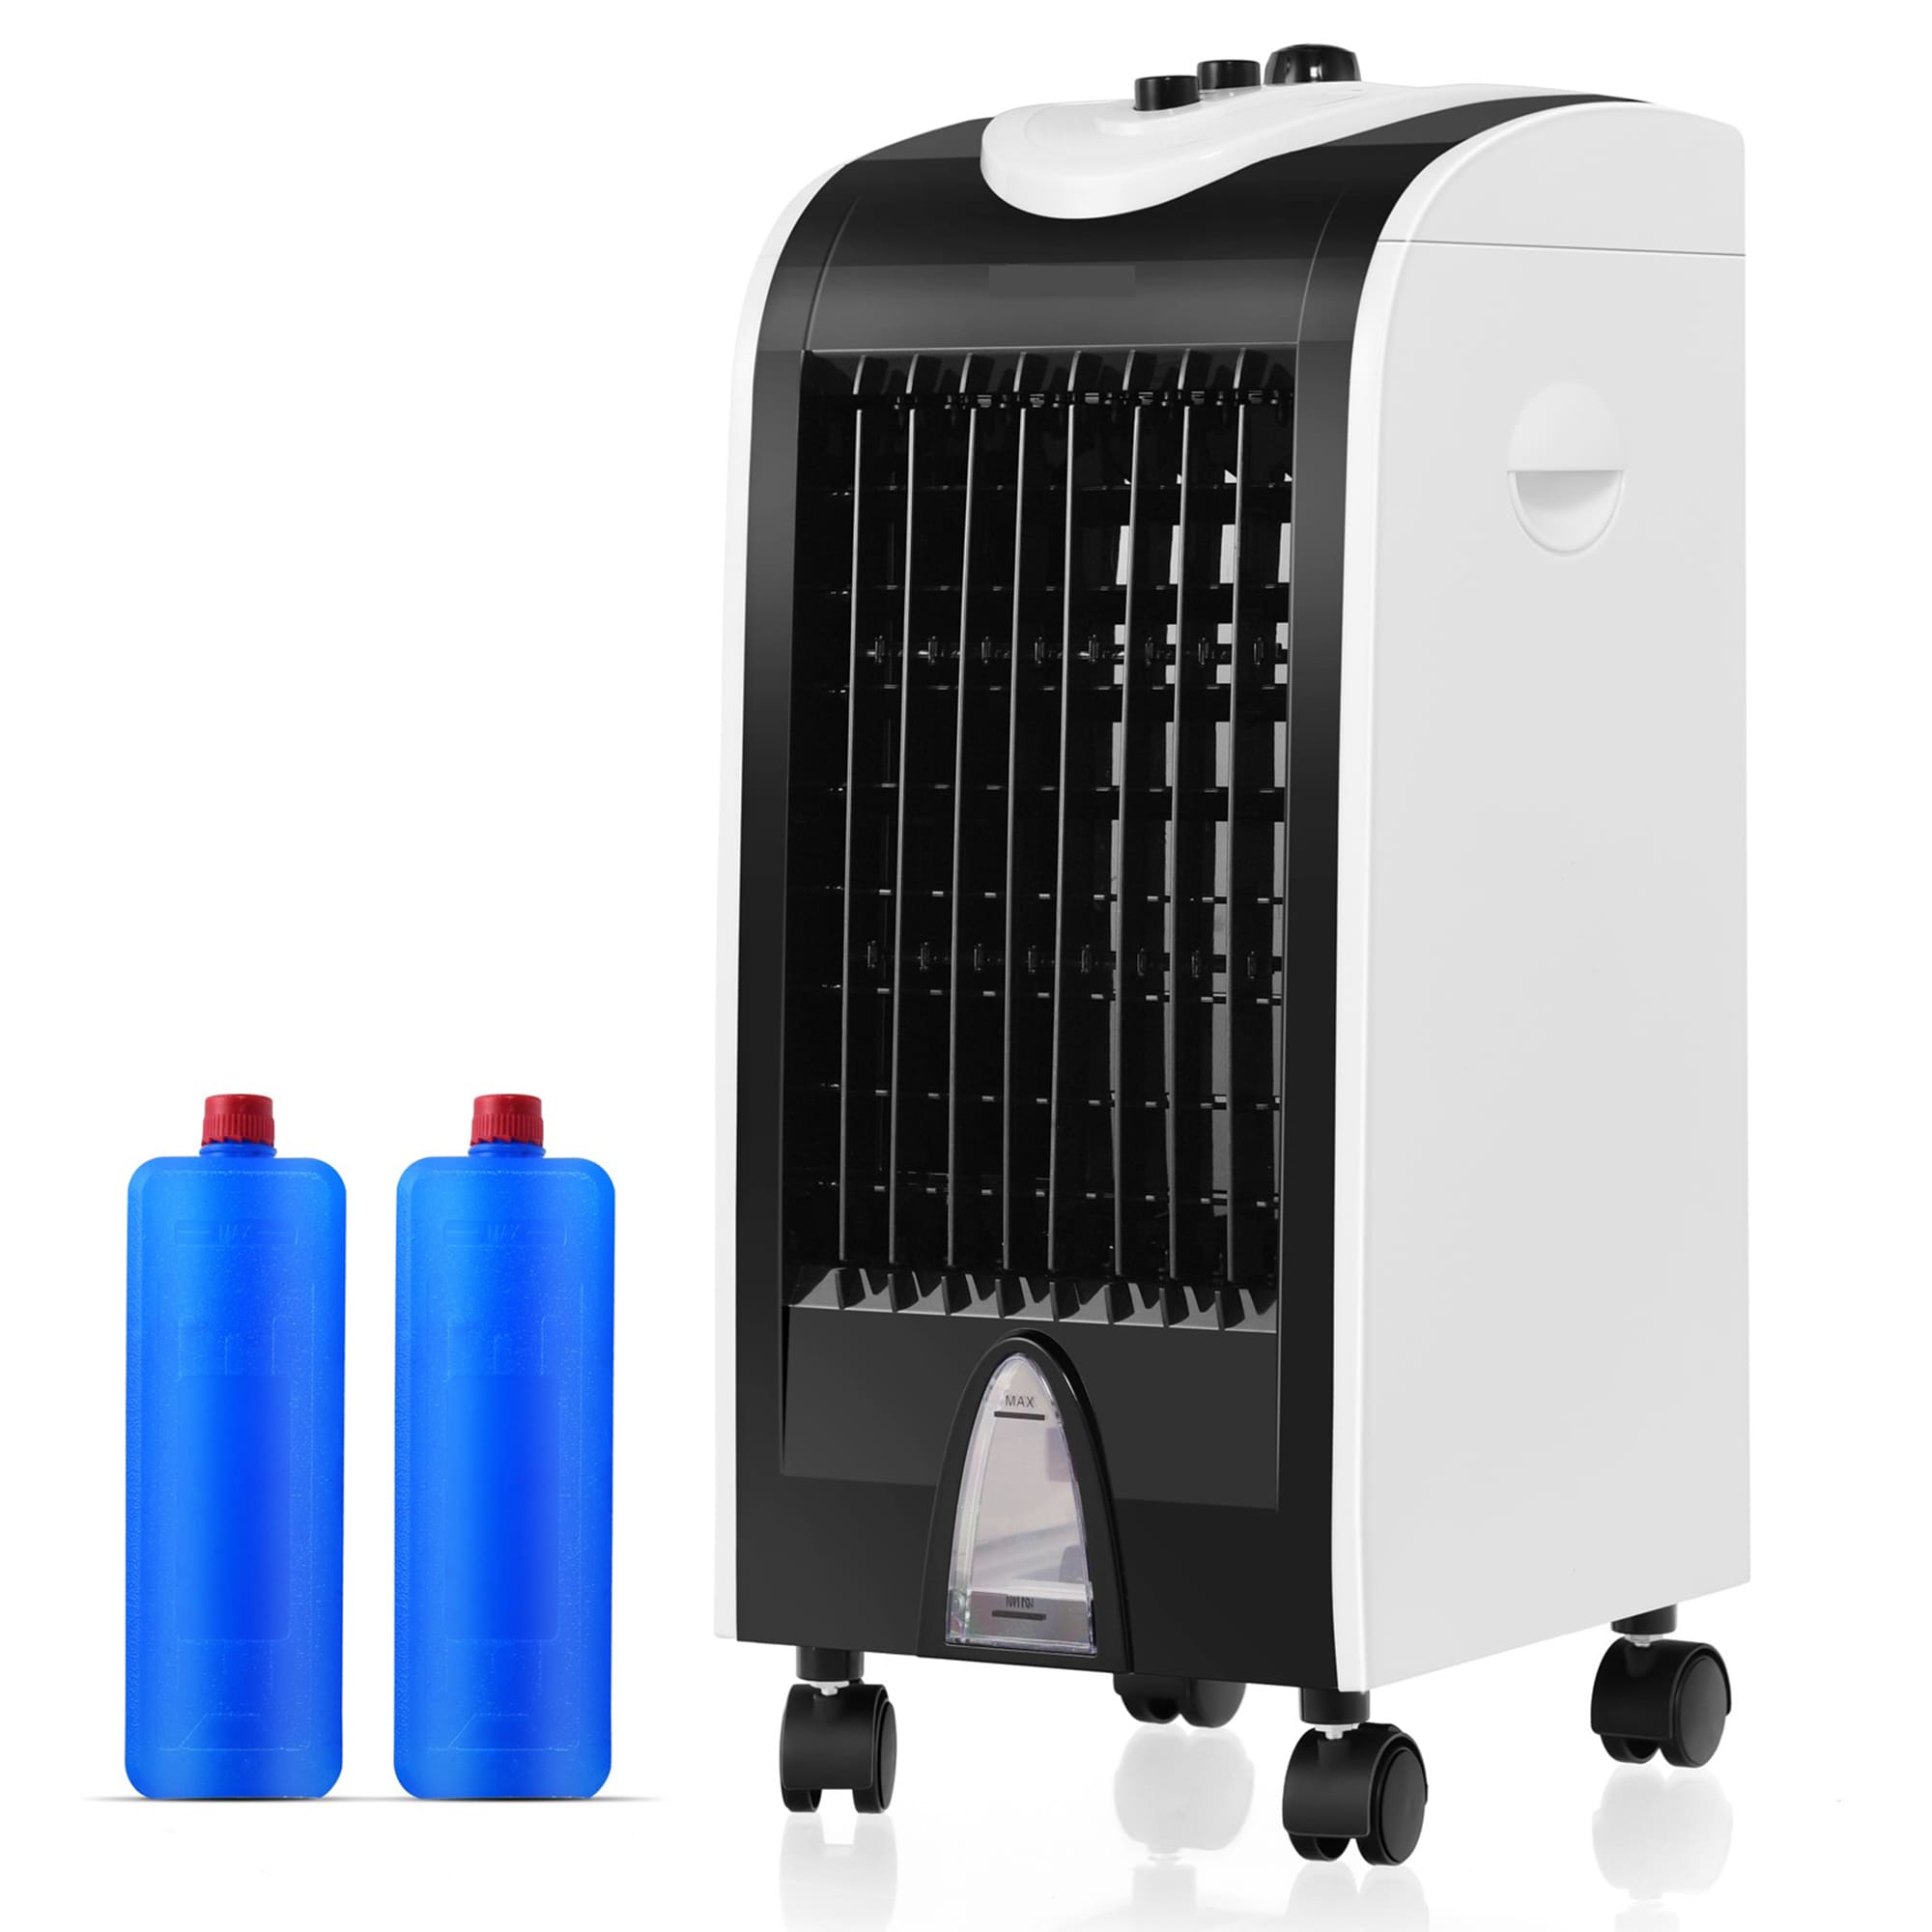 Automatic Oscillation-65W FAN MAZHONG Portable Air Cooler with 3 Operating Modes 3 Speeds